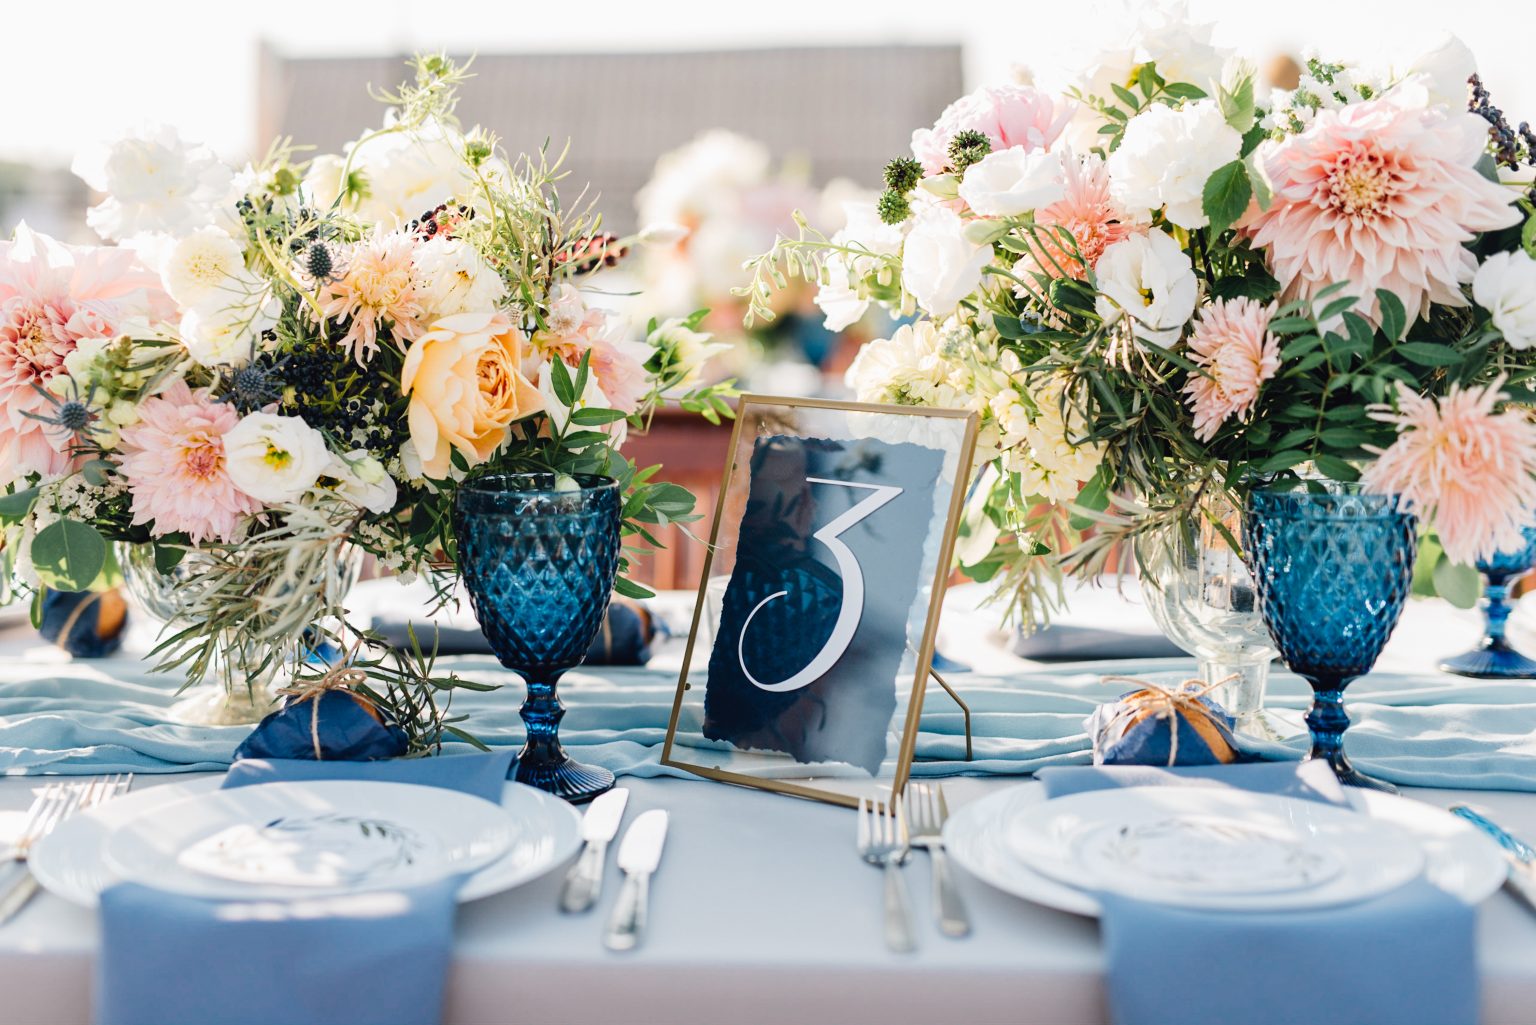 15 Alternative Wedding Table Ideas For, Wedding Table Decorations Ideas For Round Tables